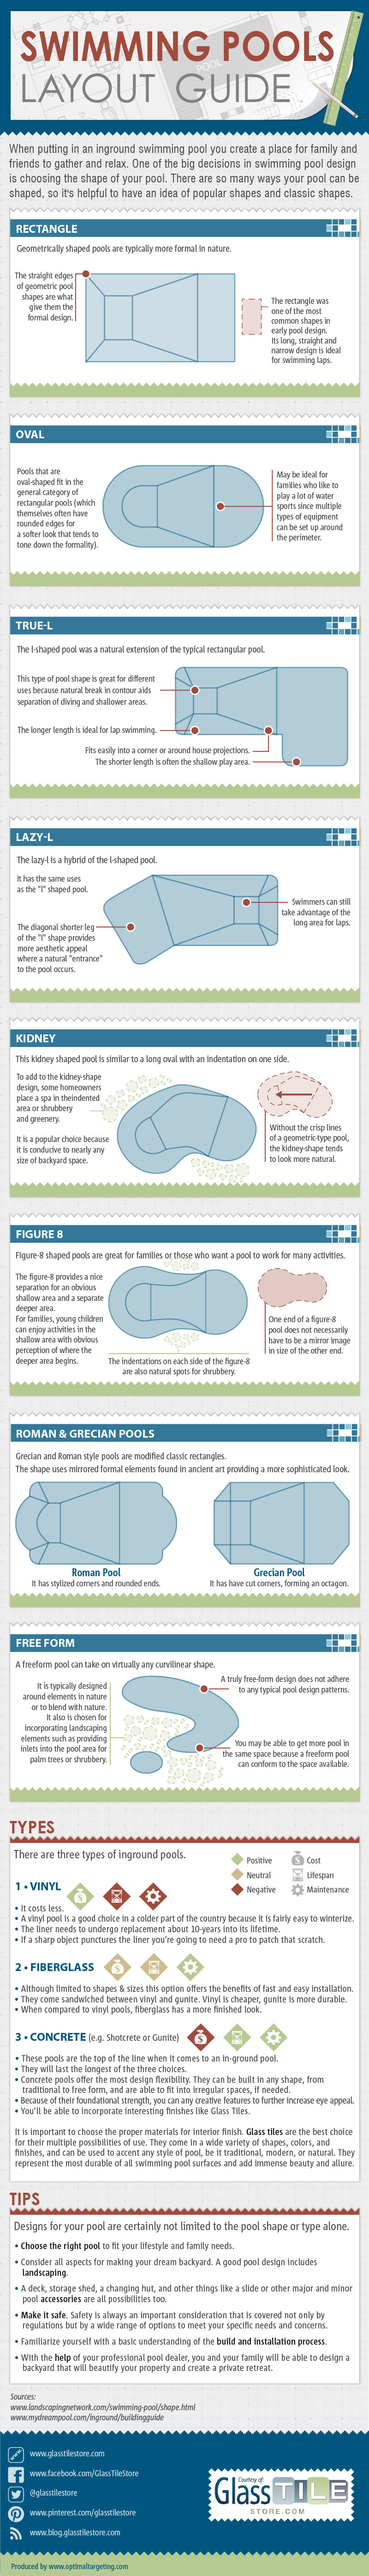 infographic_swimming_pool_layout_guide.jpg